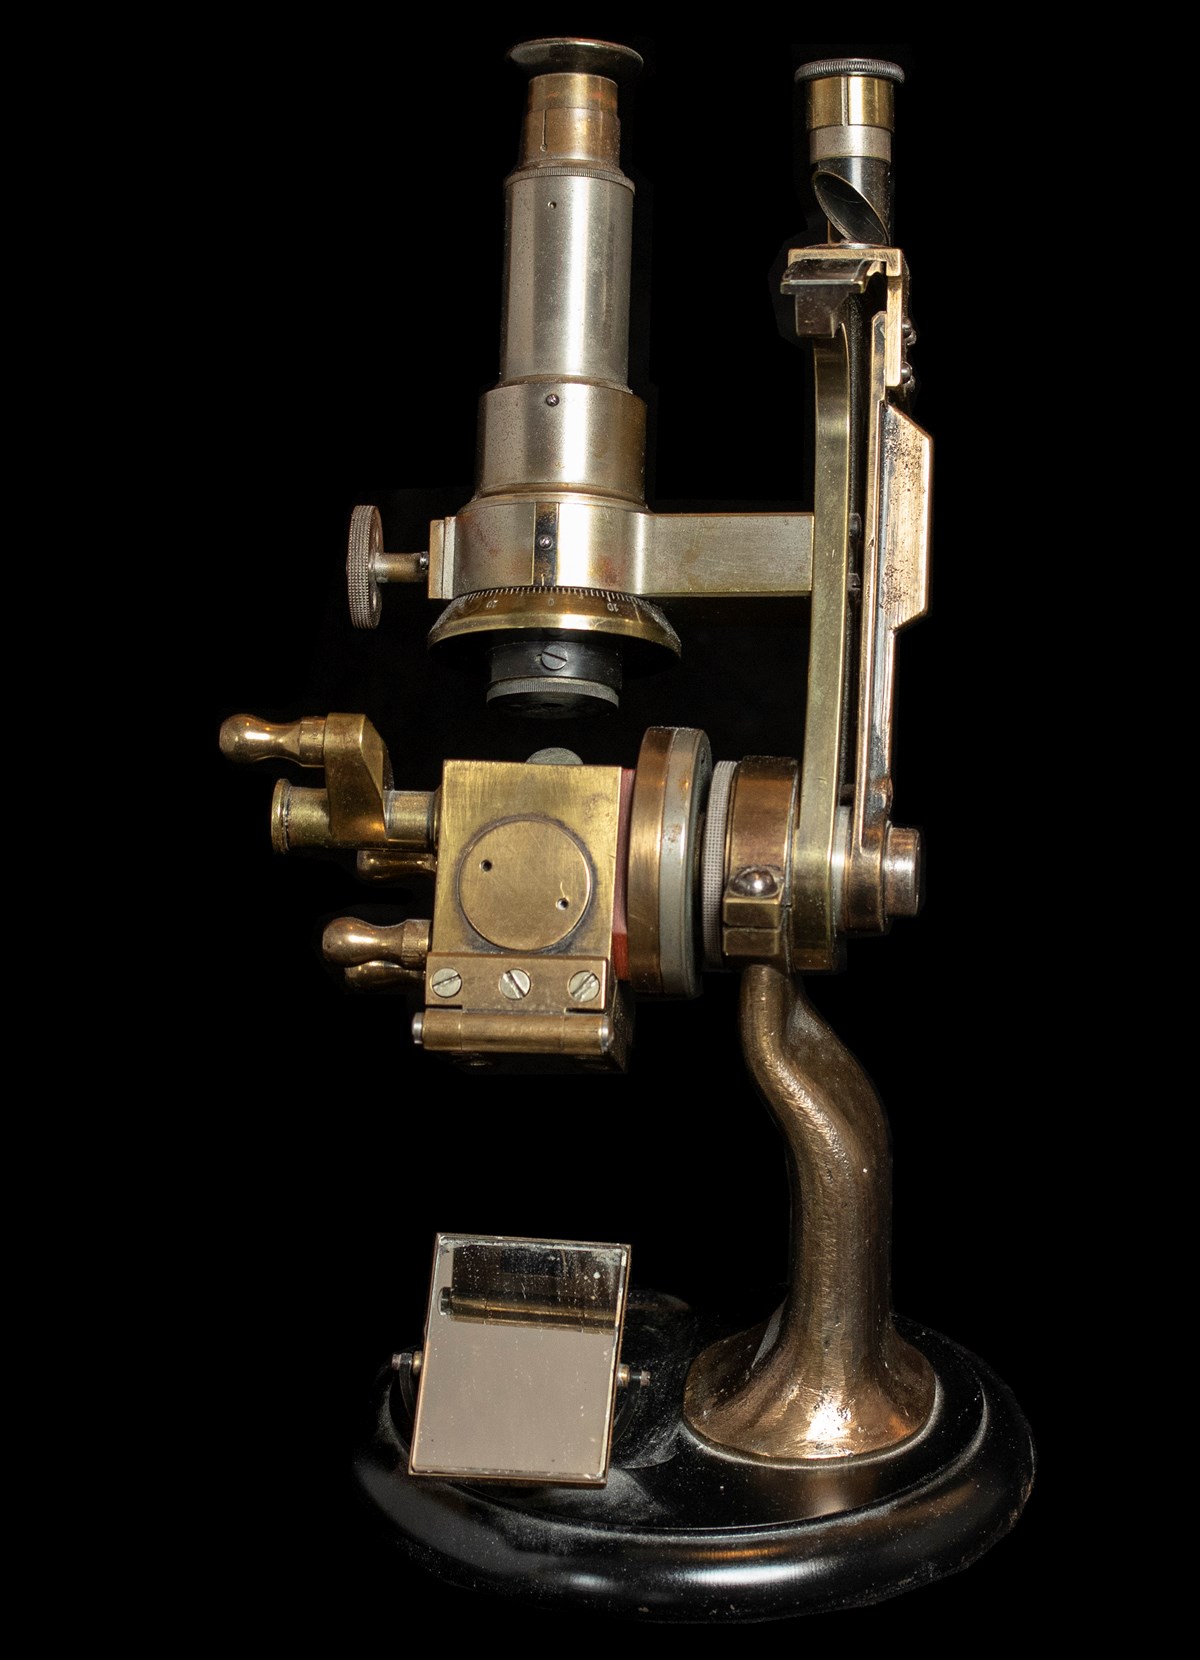 Front view of an Abbe refractometer made of a worn brass-like metal. The instrument resembles a microscope with an eyepiece at the top and a slanted platform at the bottom to place the sample.